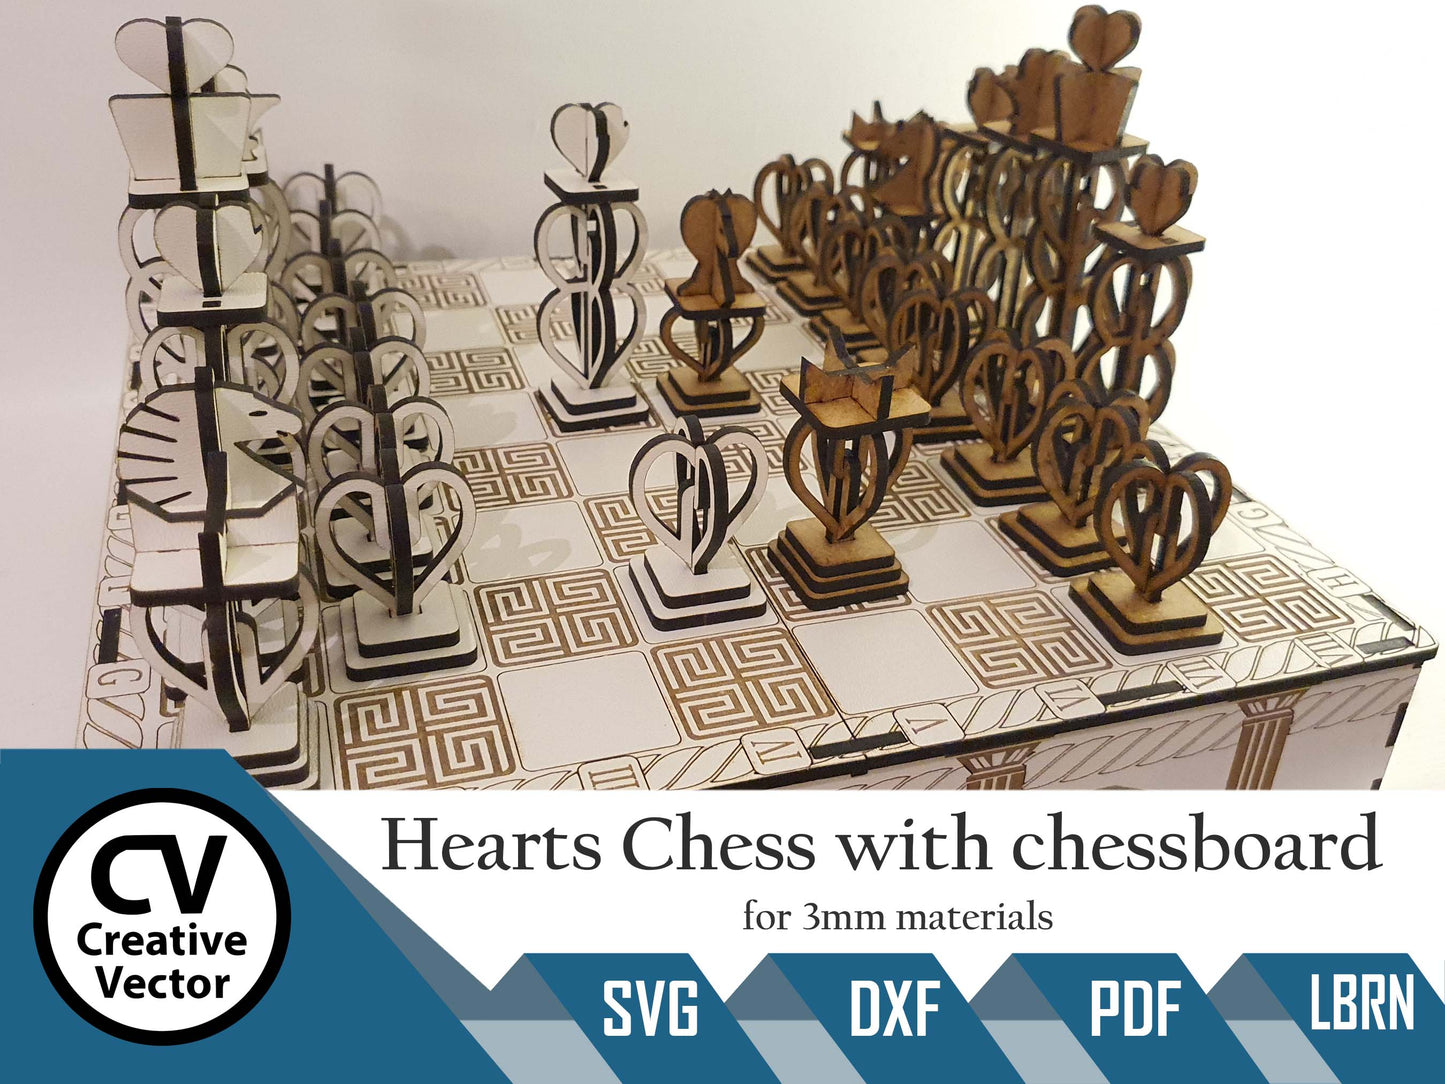 Hearts Chess with chessboard